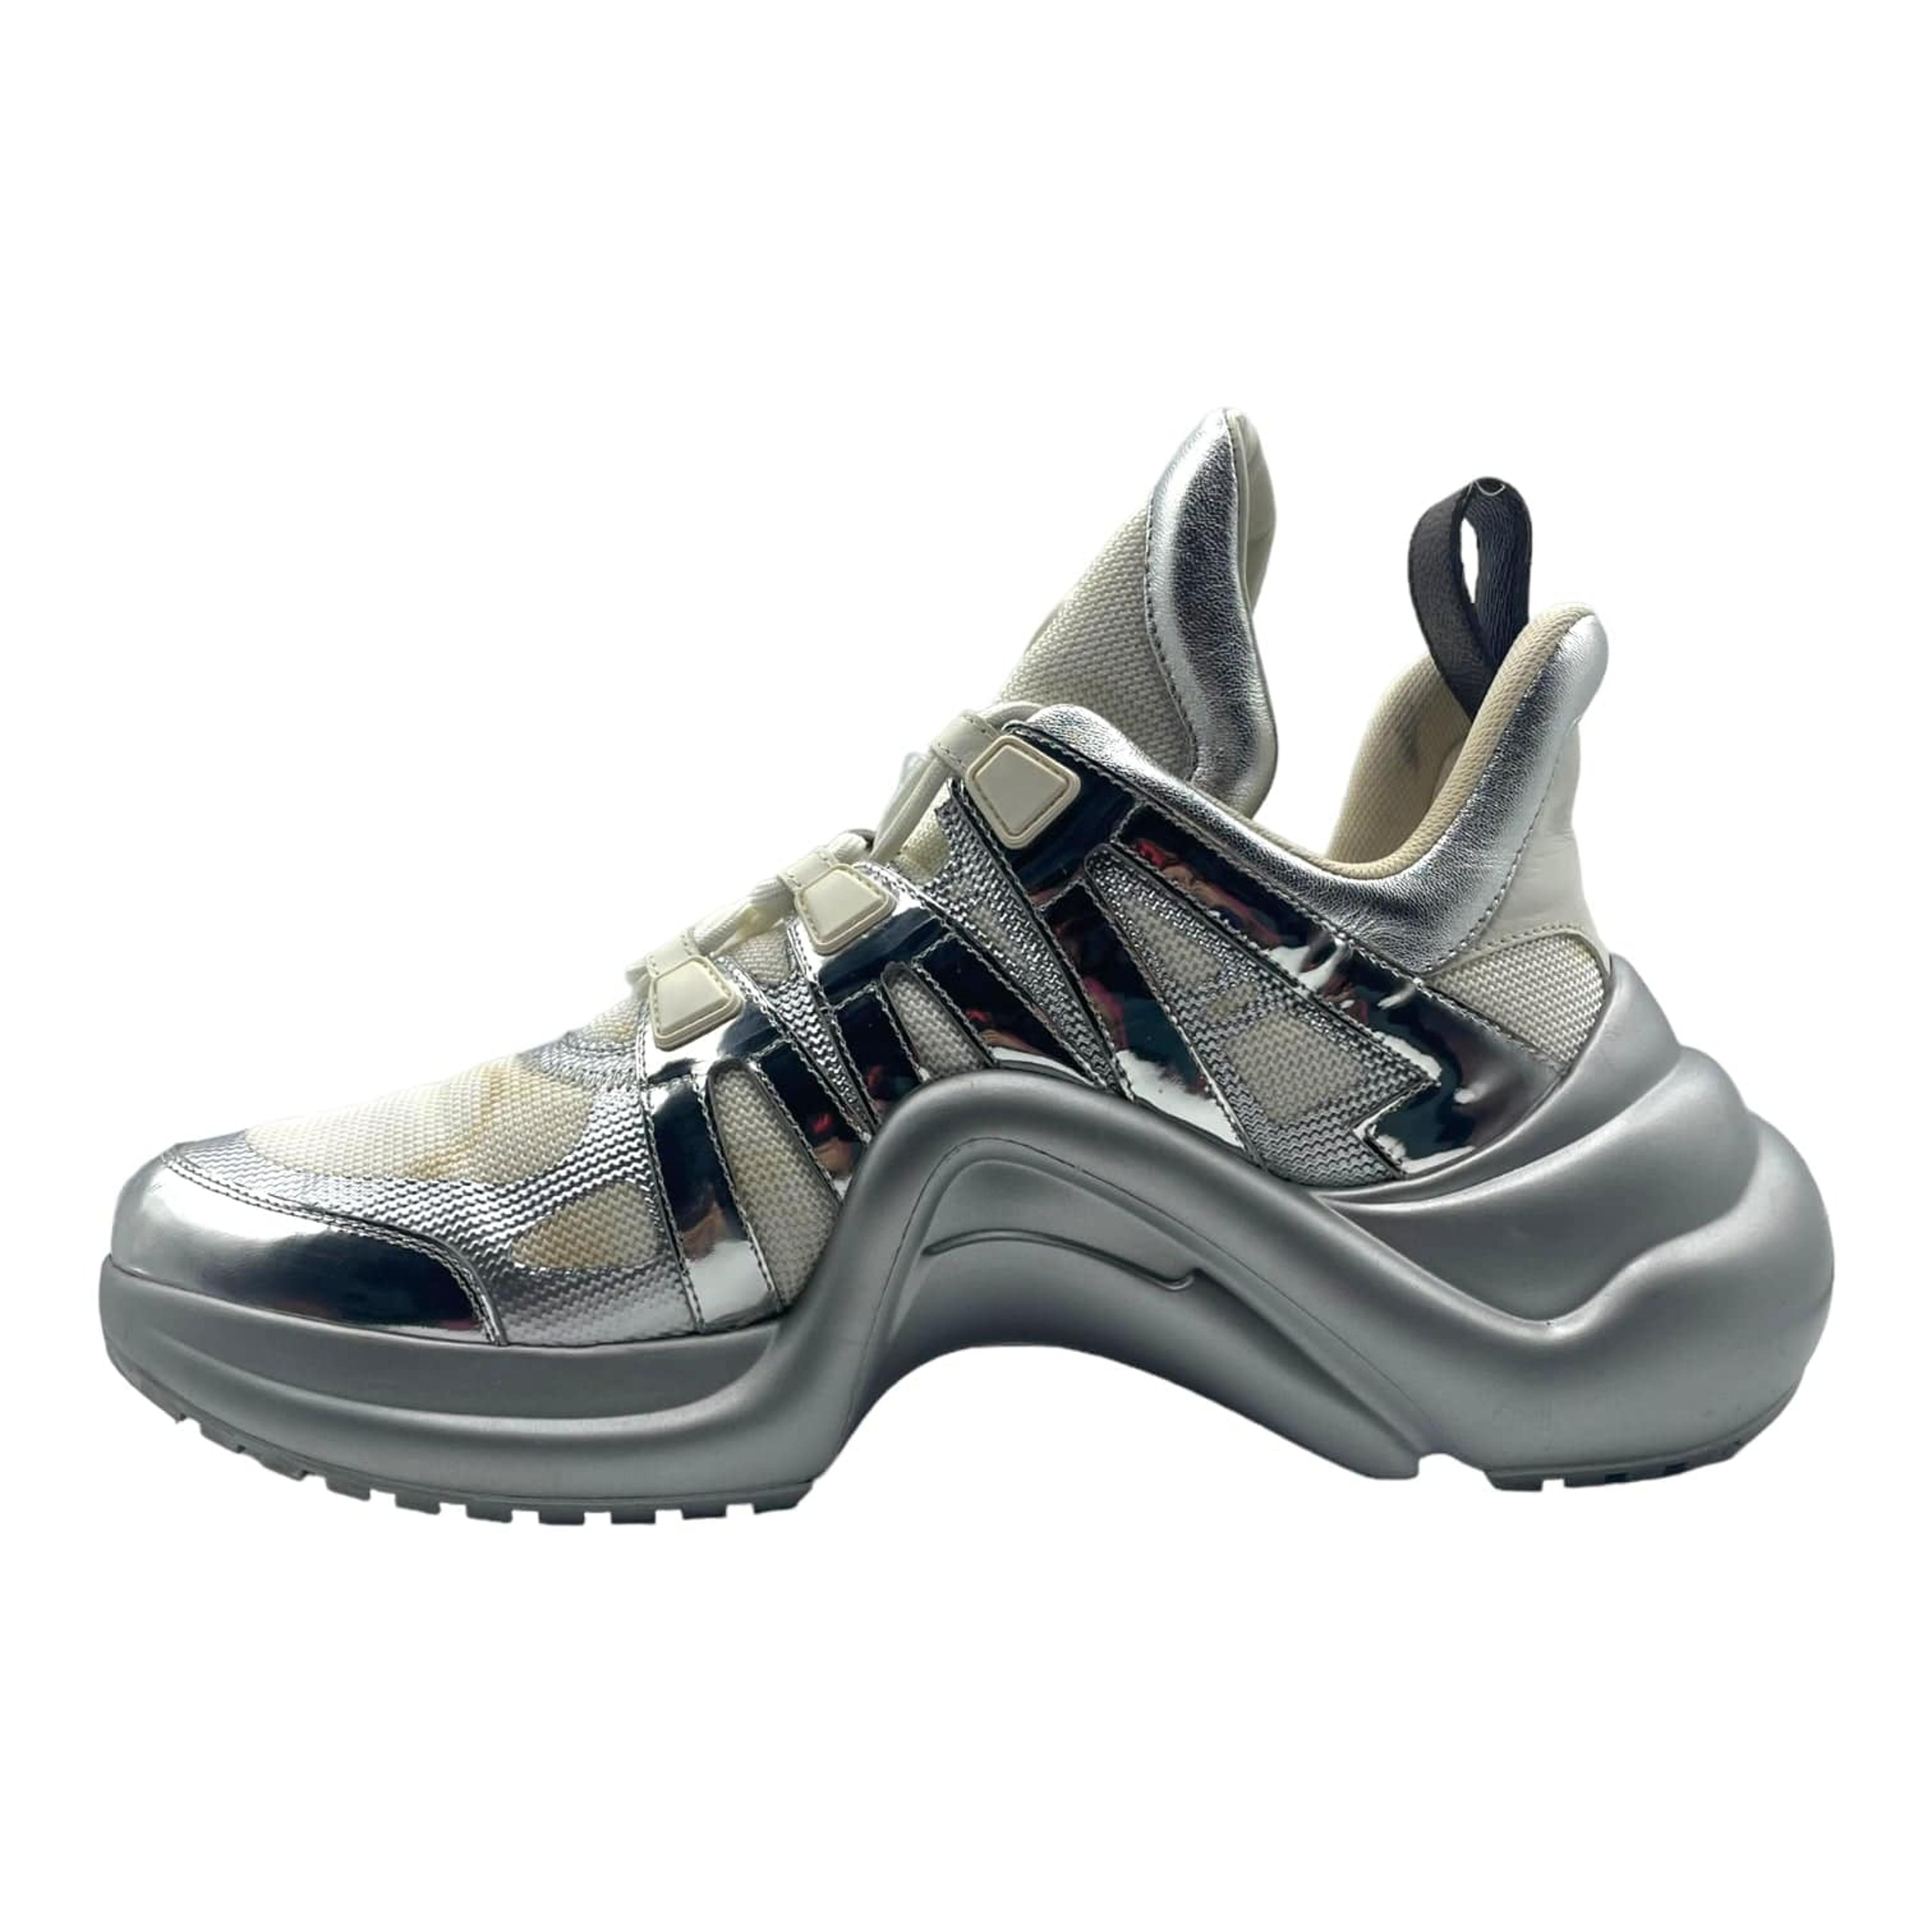 Cool Sytle Louis Vuitton Archlight Silver Sneaker Shoes